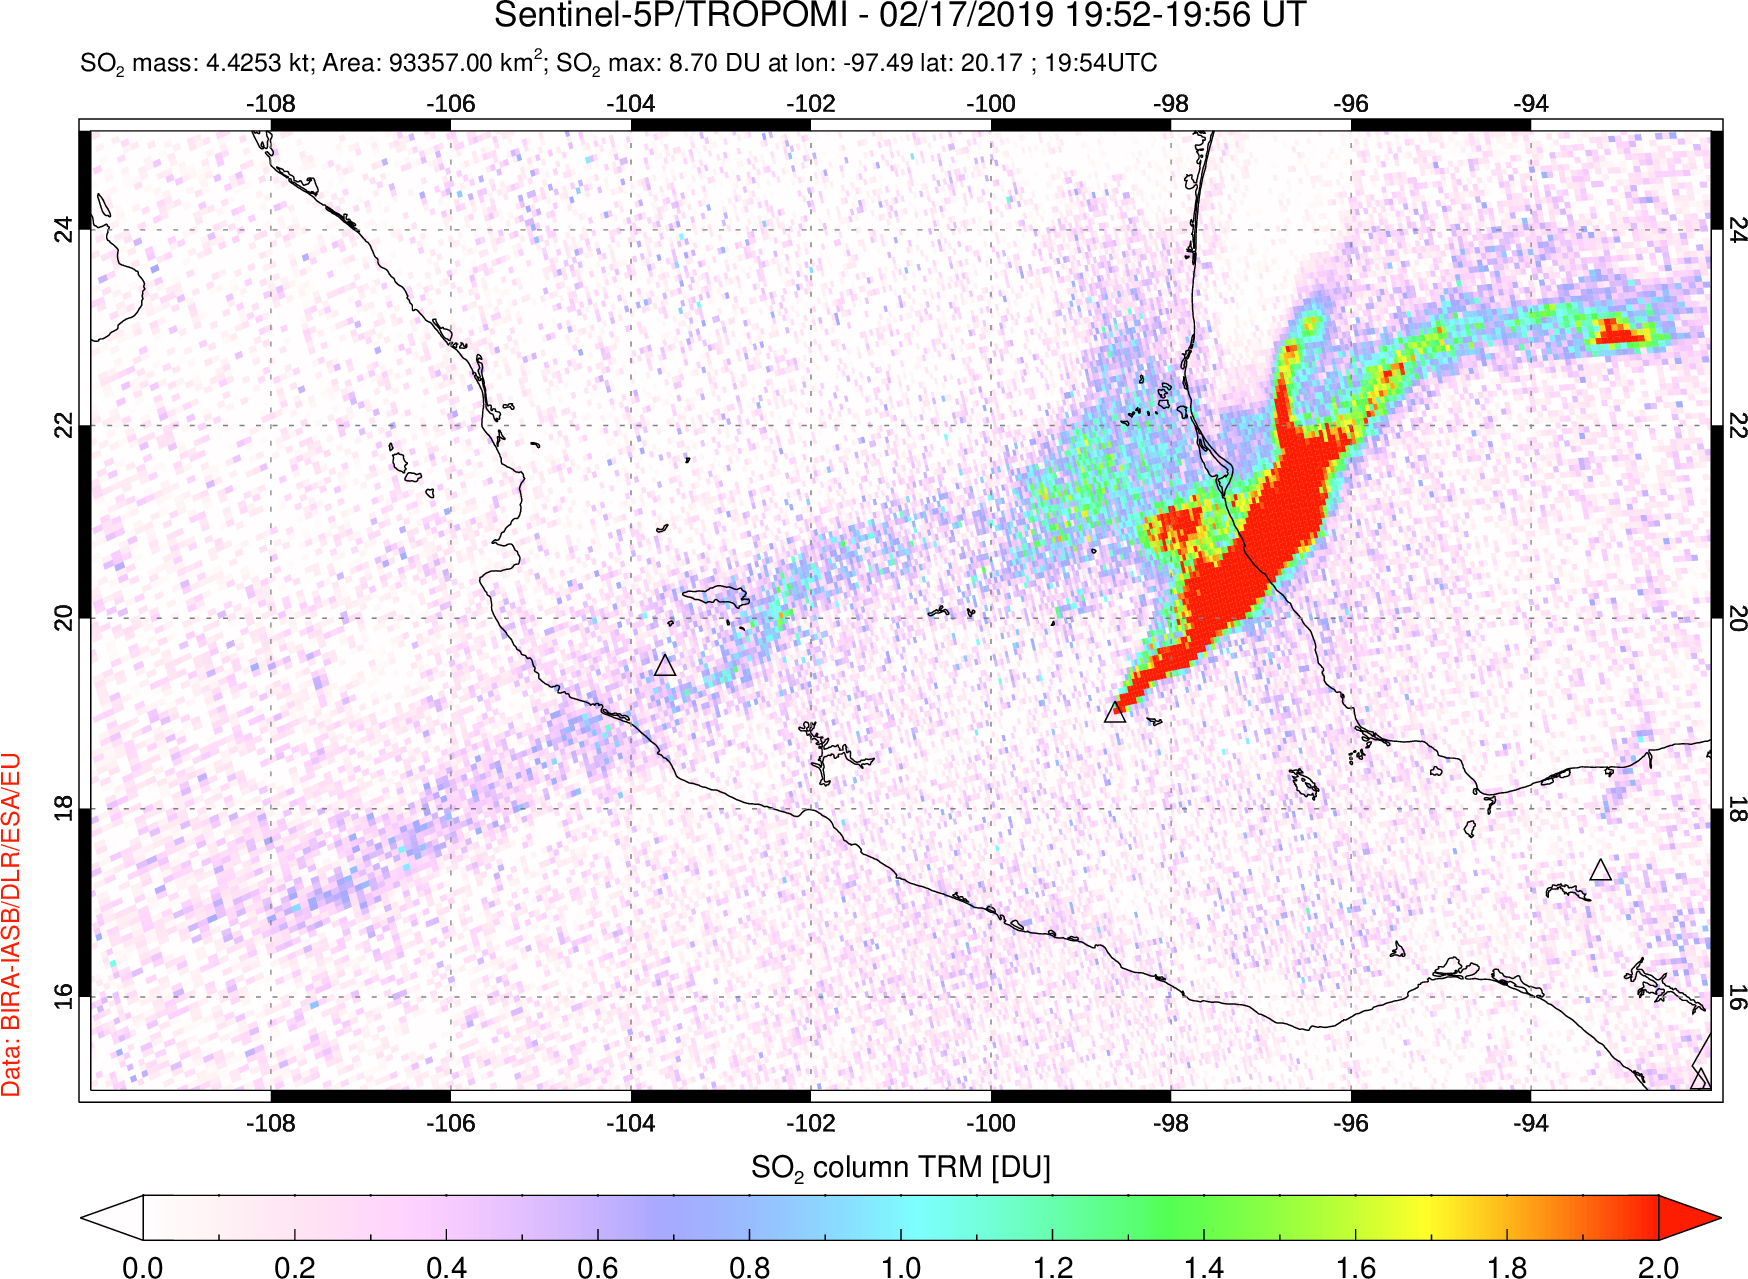 A sulfur dioxide image over Mexico on Feb 17, 2019.